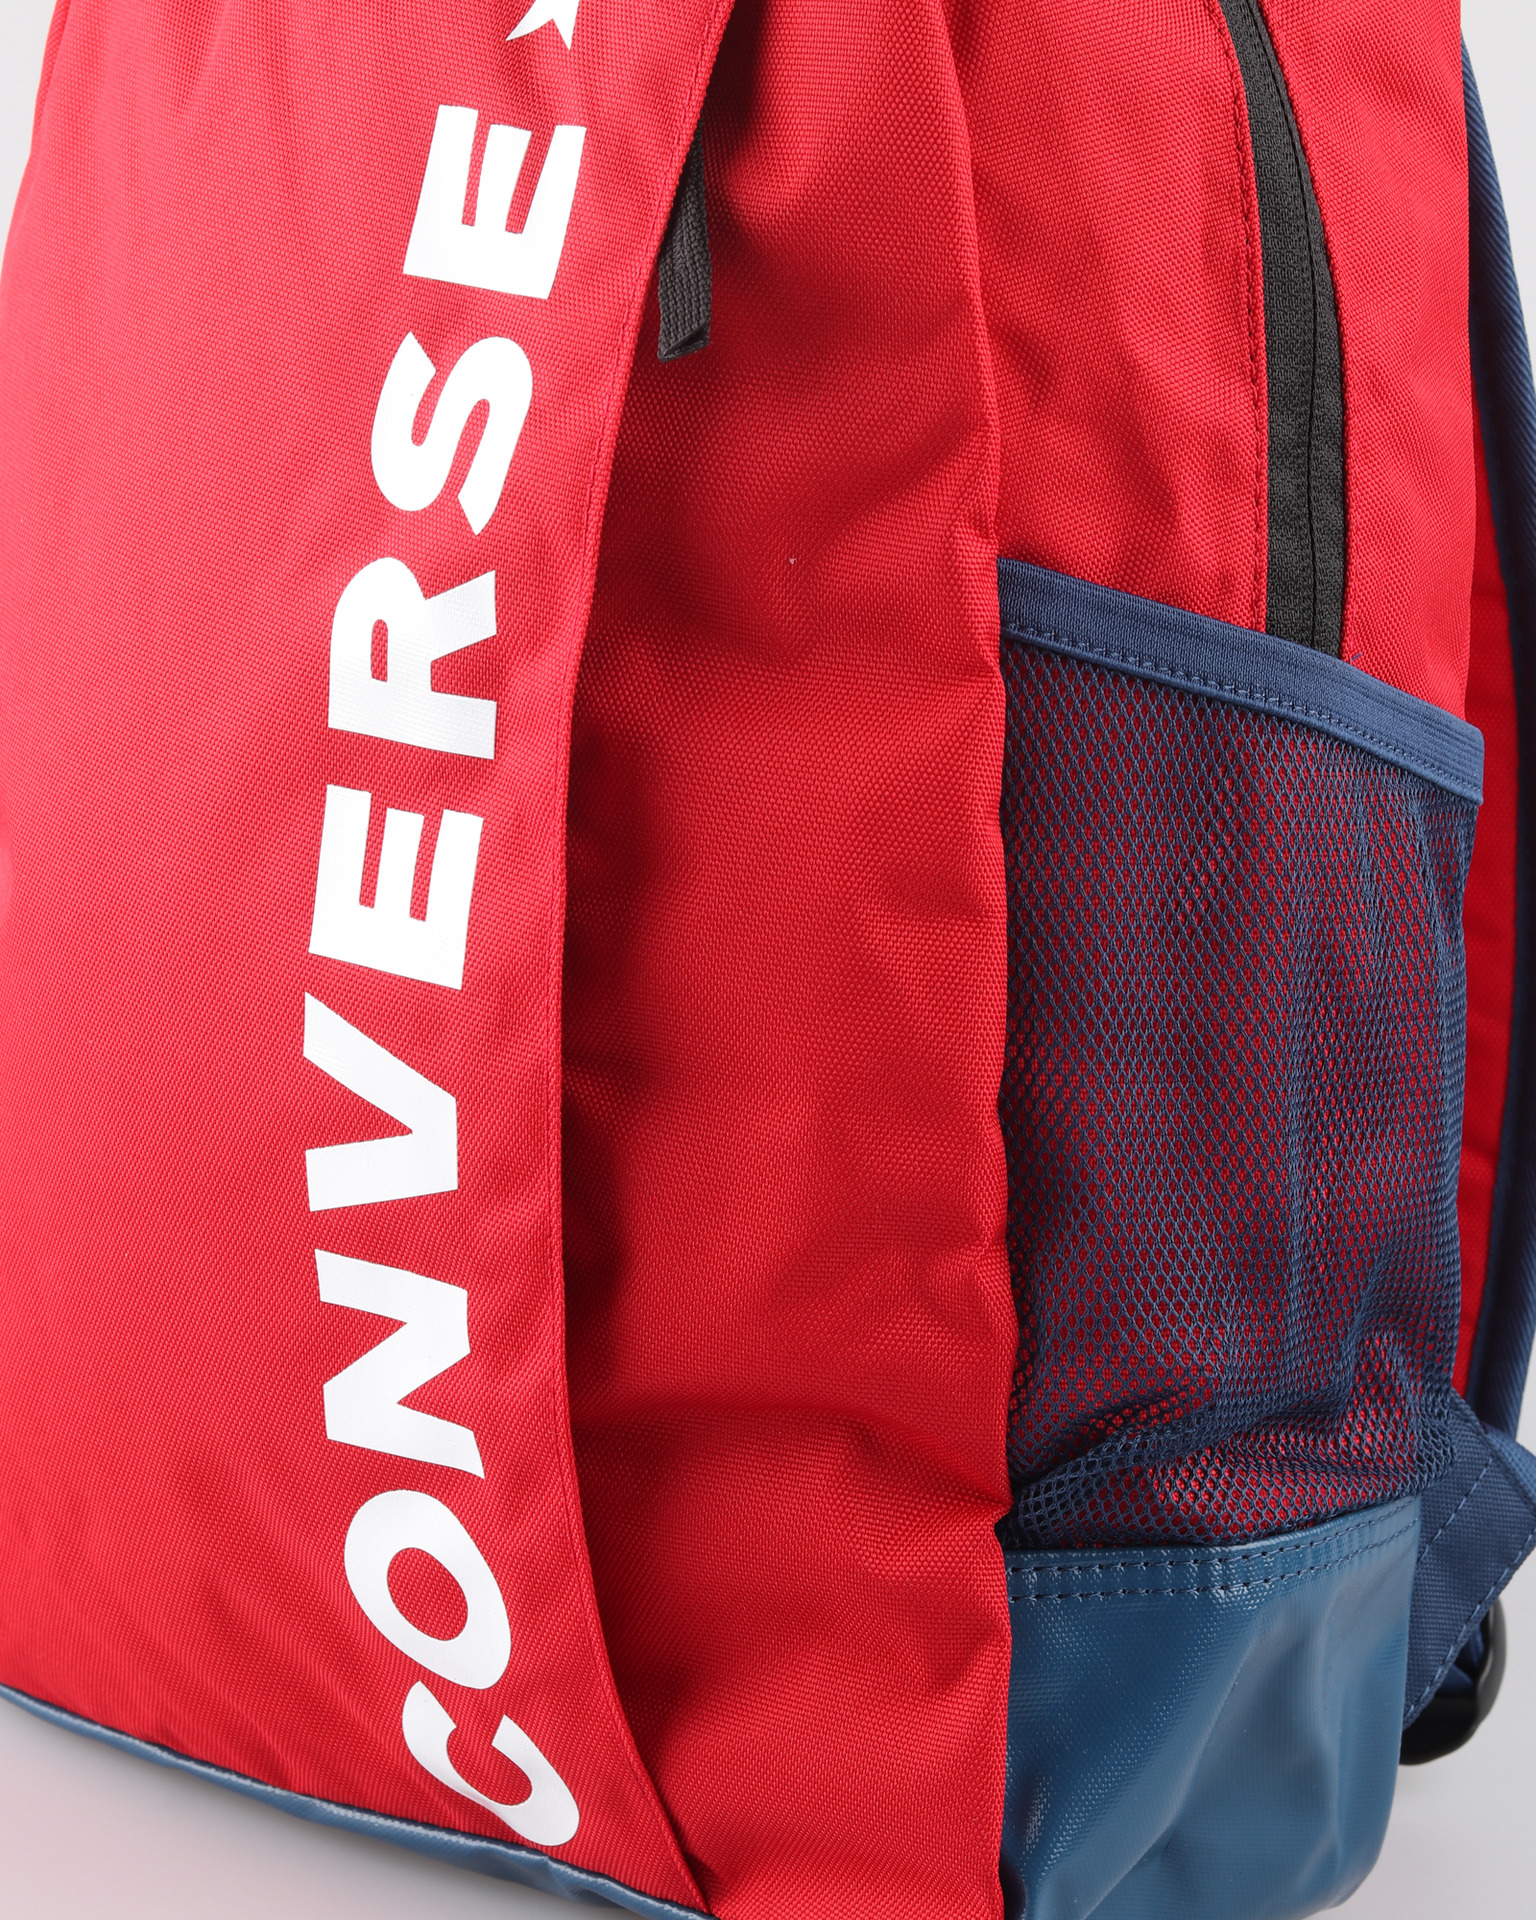 converse speed backpack 2.0